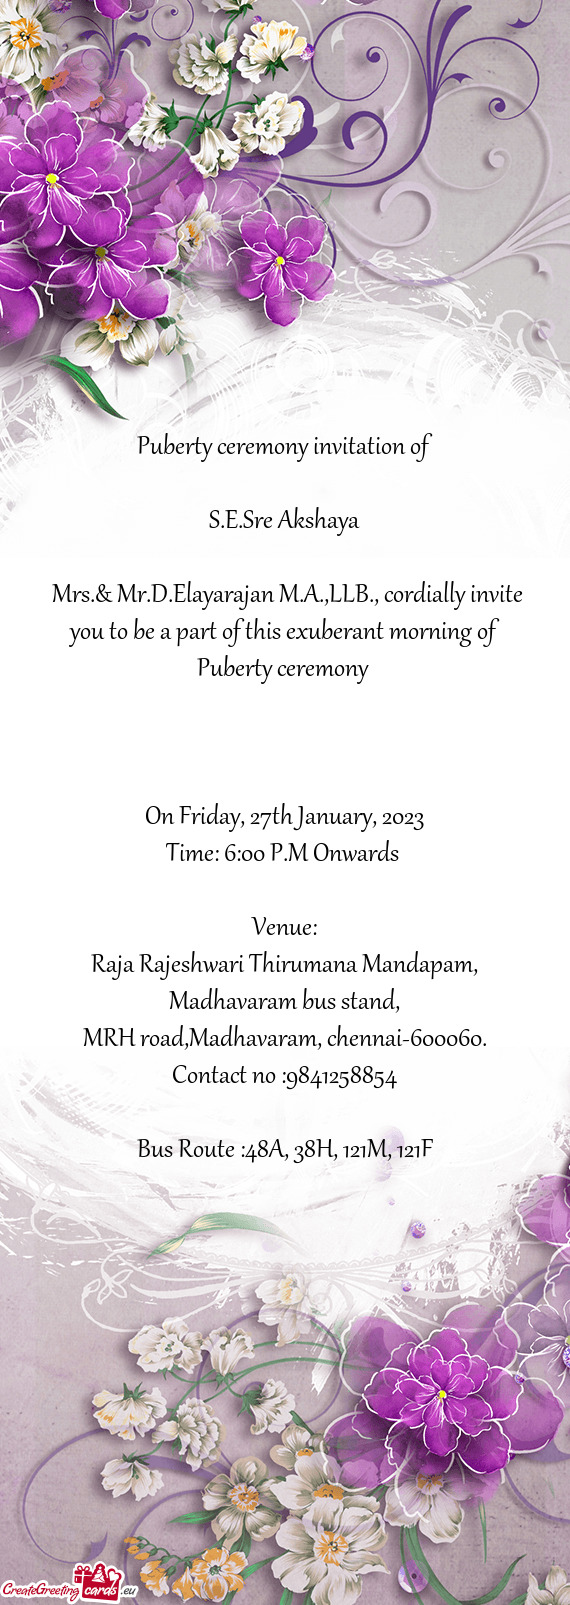 Mrs.& Mr.D.Elayarajan M.A.,LLB., cordially invite you to be a part of this exuberant morning of Pub